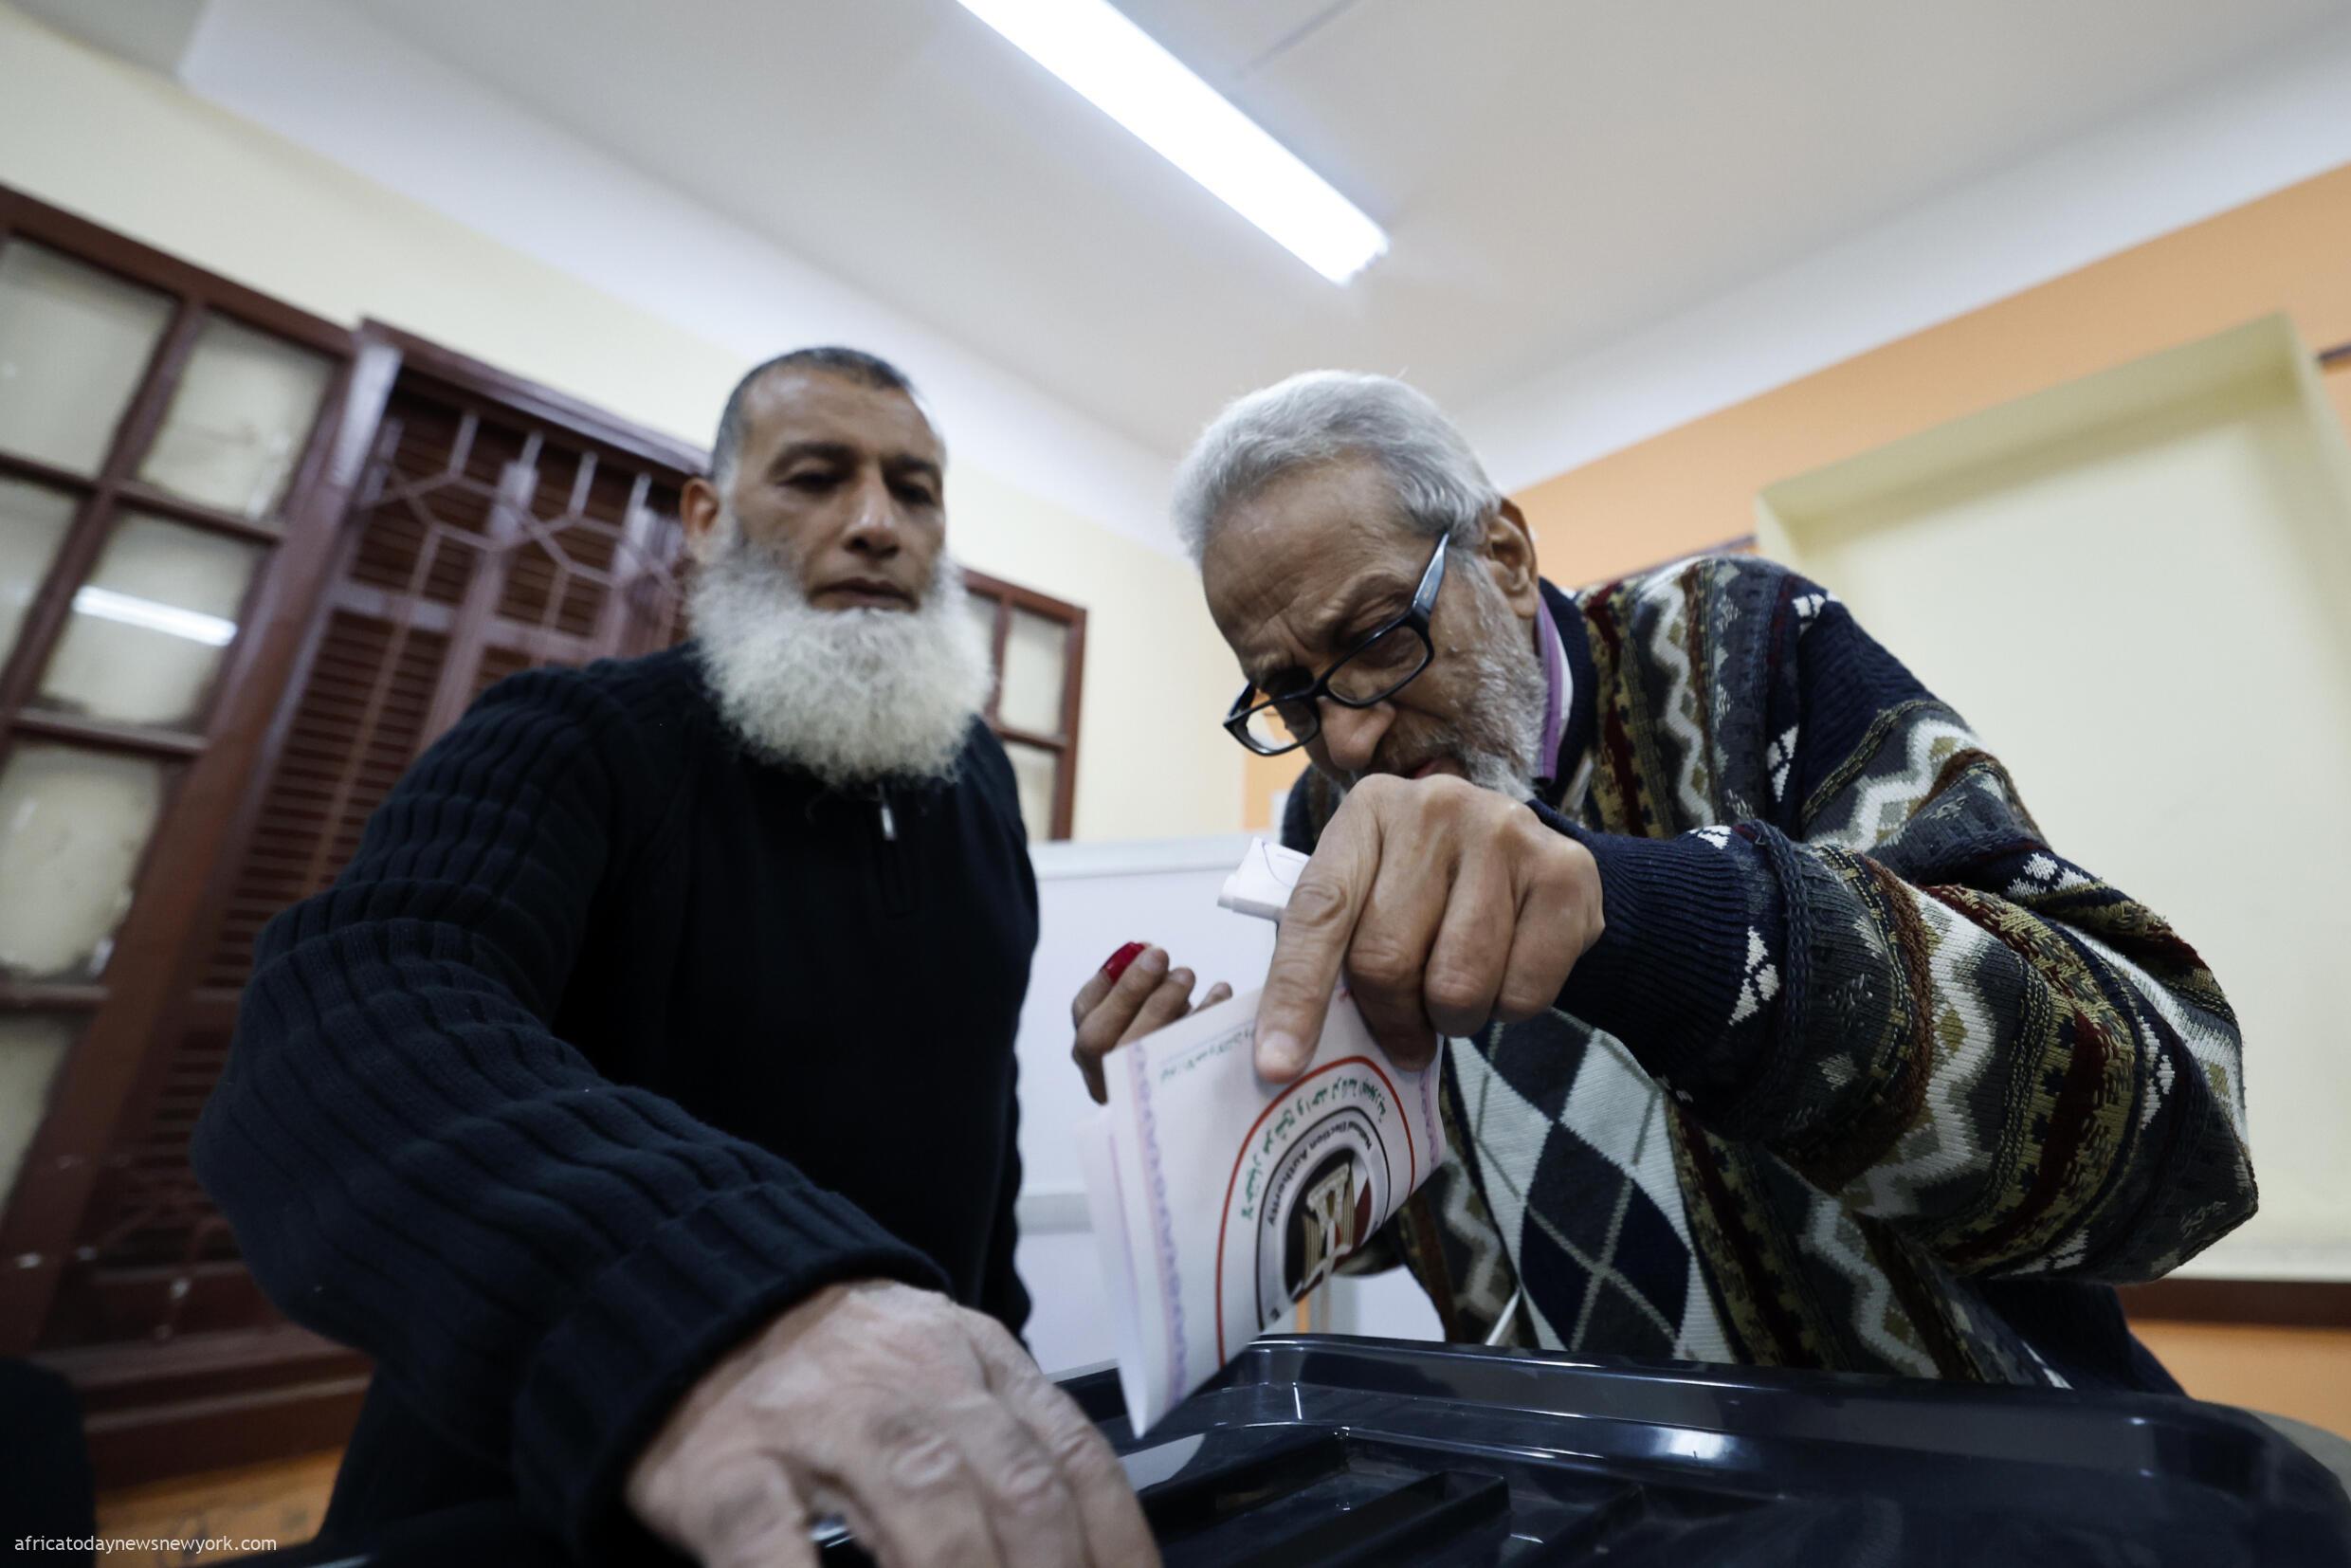 Egyptians Head To Polls As Gaza Conflict Looms Large